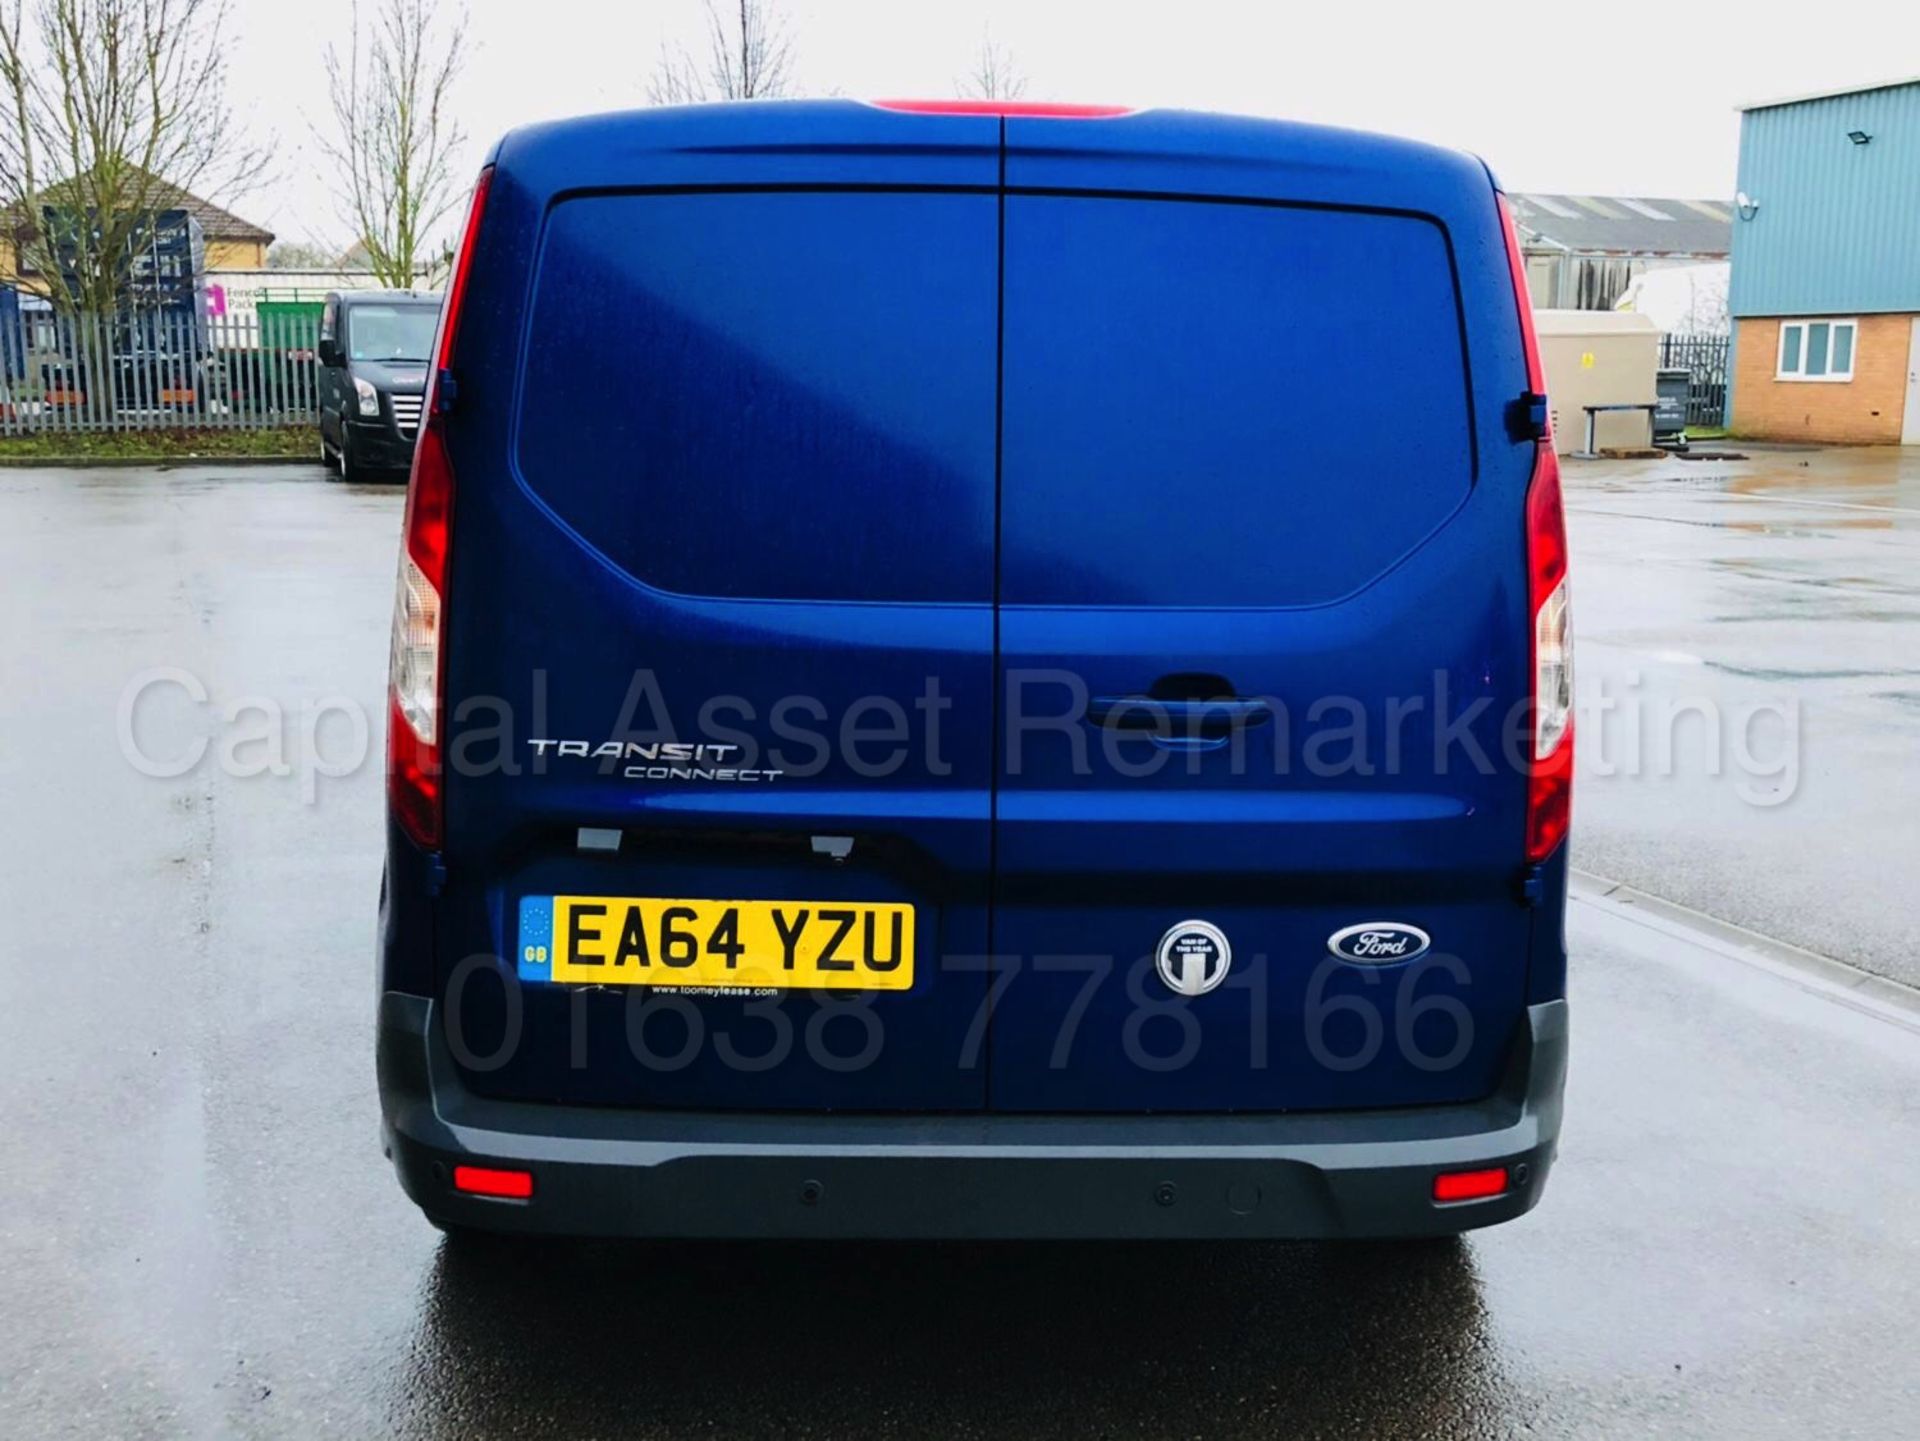 FORD TRANSIT CONNECT 'LIMITED' (2015 - FACELIFT MODEL) '1.6 TDCI - 115 PS - 6 SPEED' *A/C* (1 OWNER) - Image 4 of 28